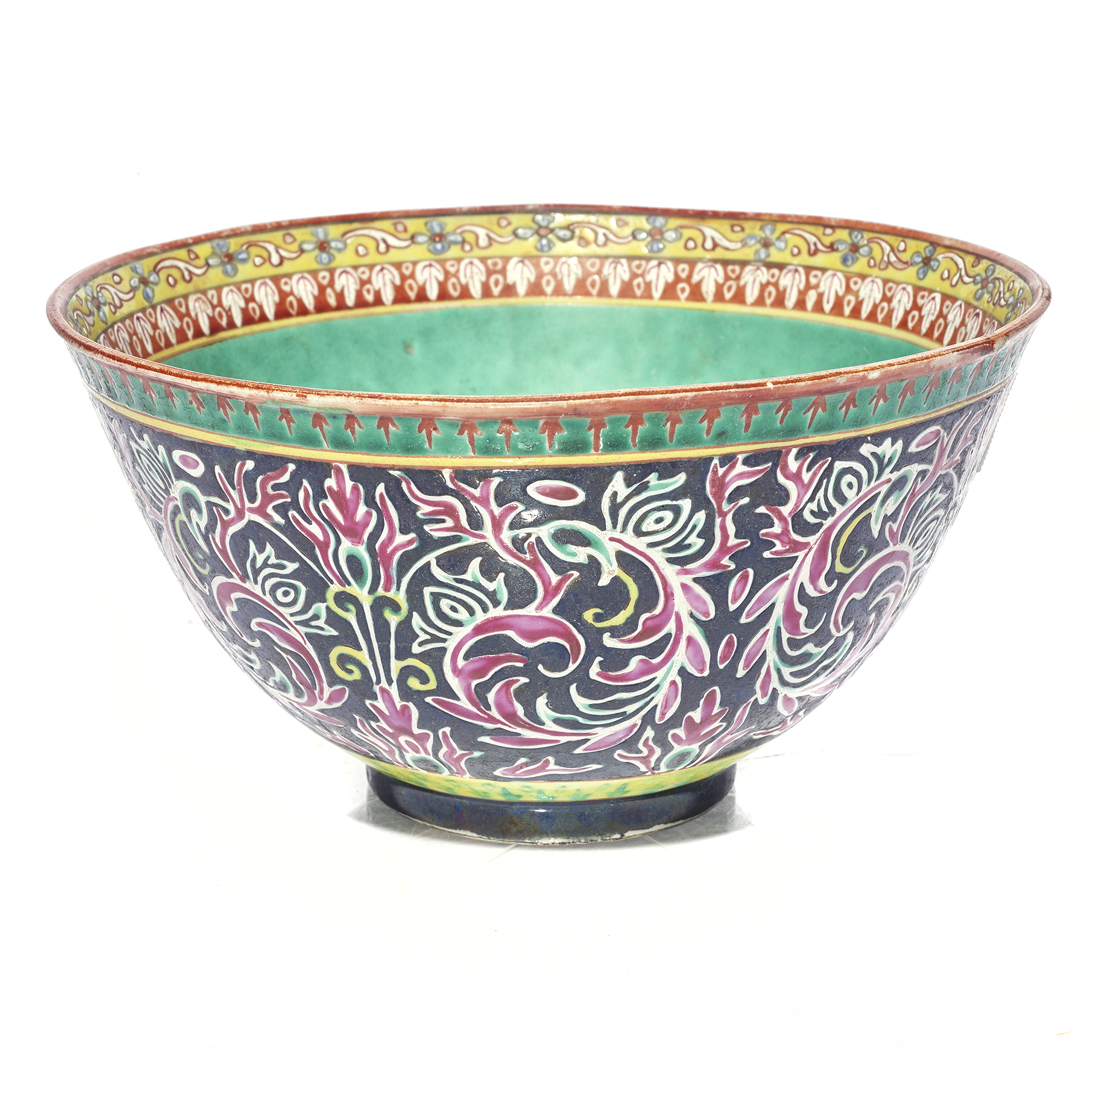 CHINESE EXPORT ENAMELED BOWL FOR 3a29e7